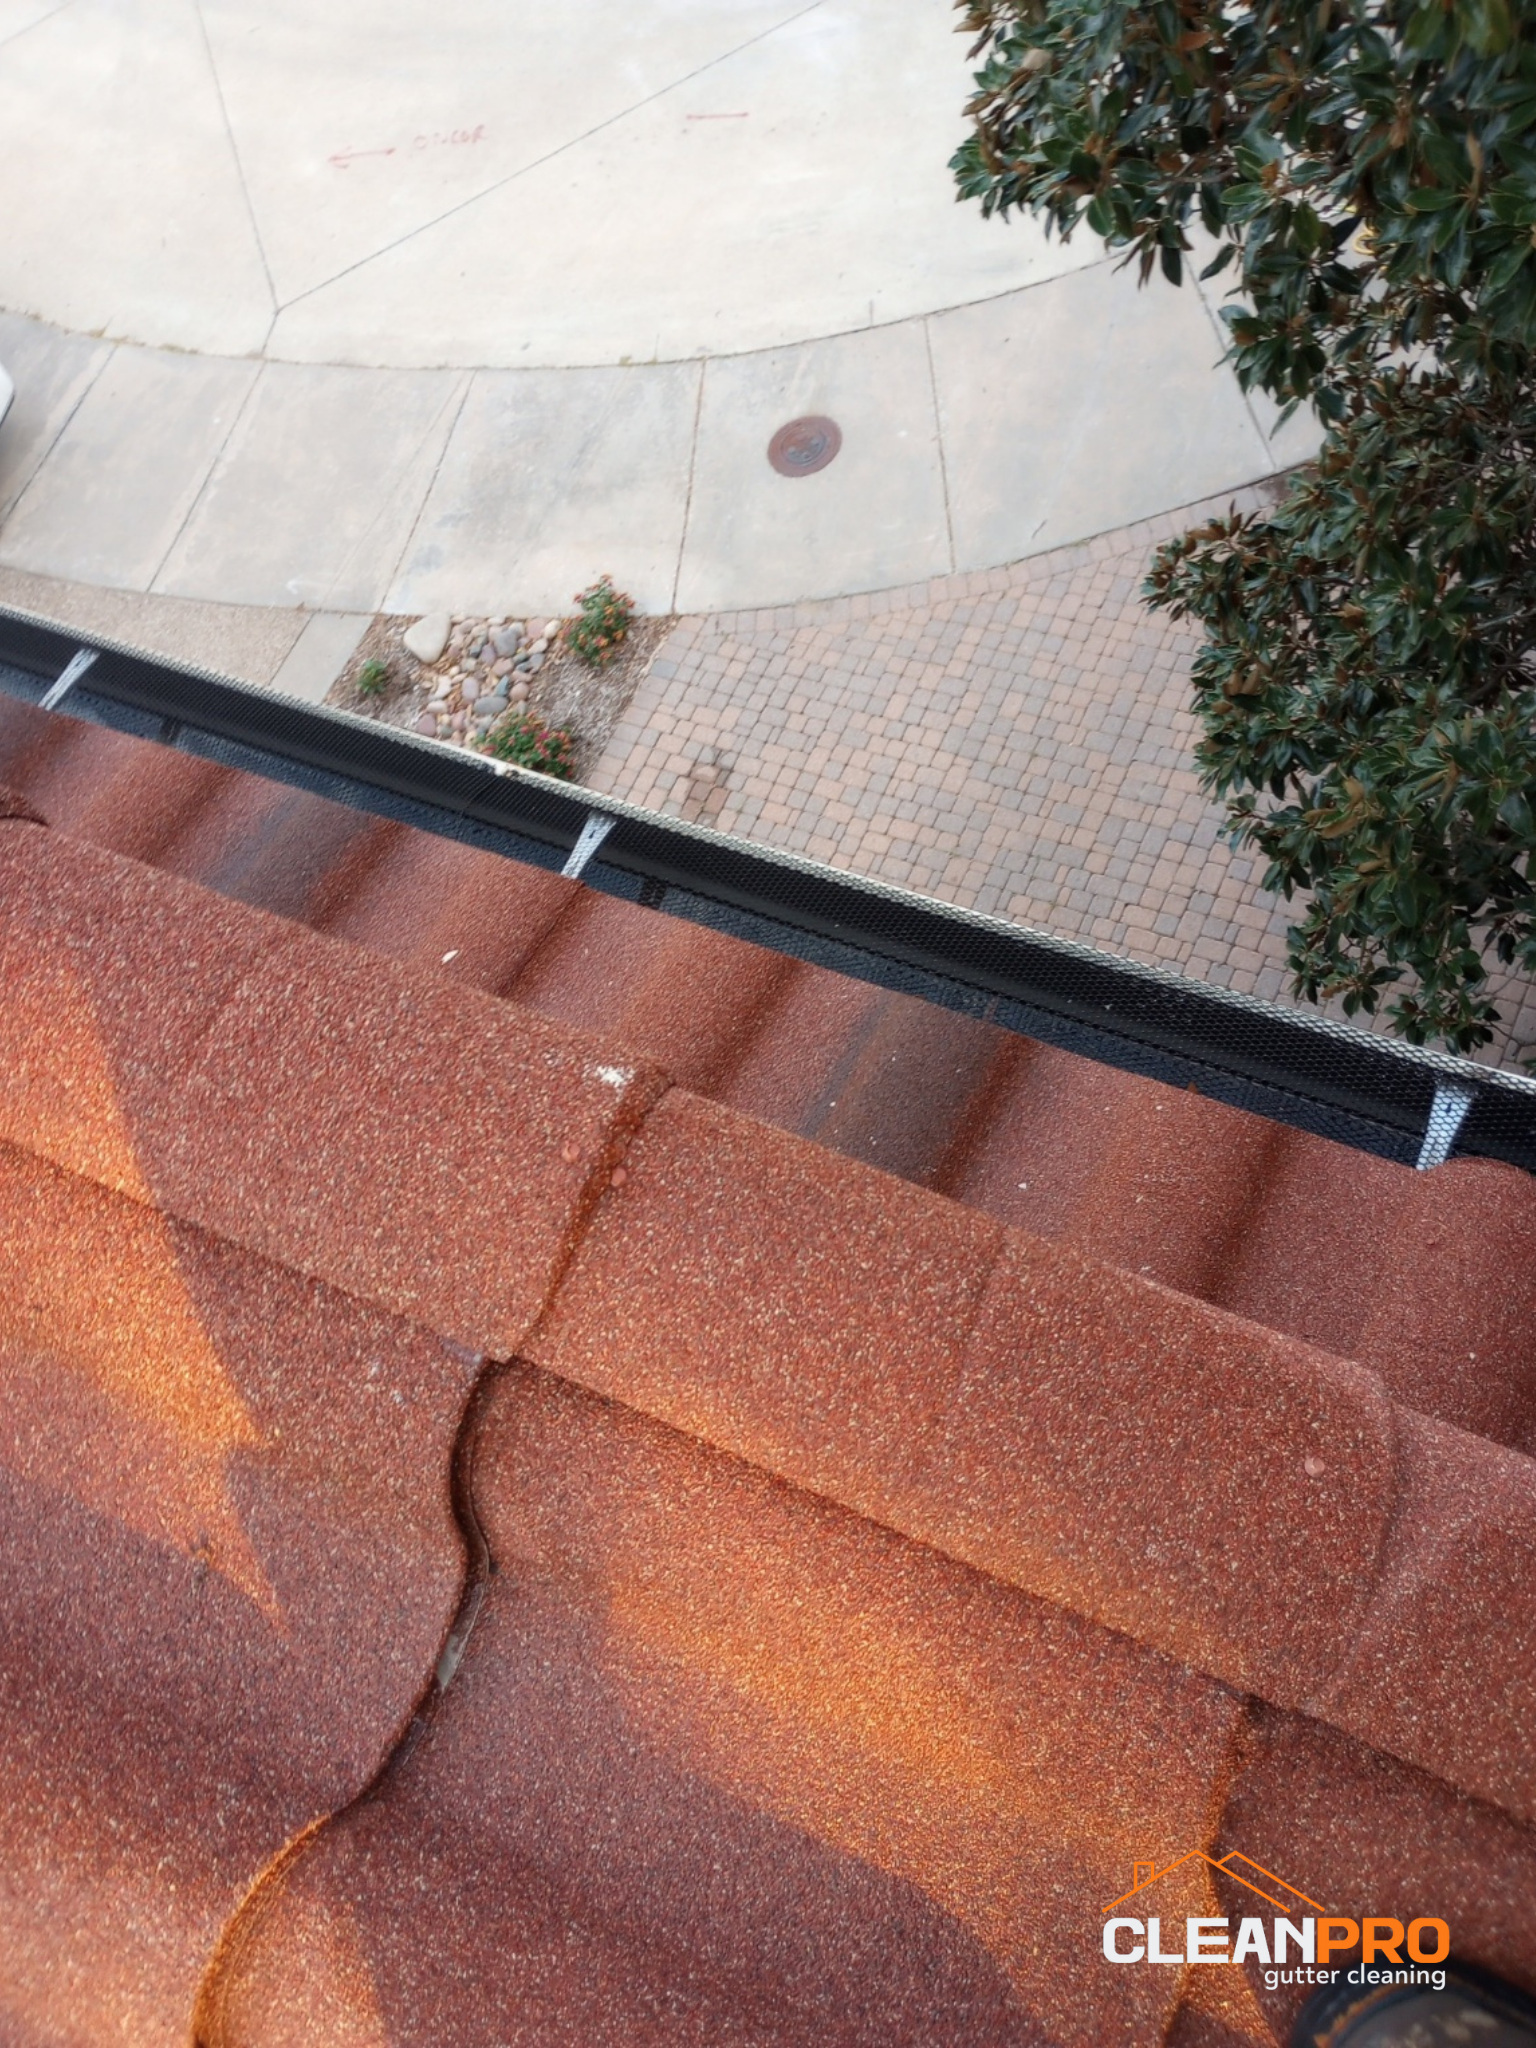 Quality Gutter Cleaning in Atlanta GA